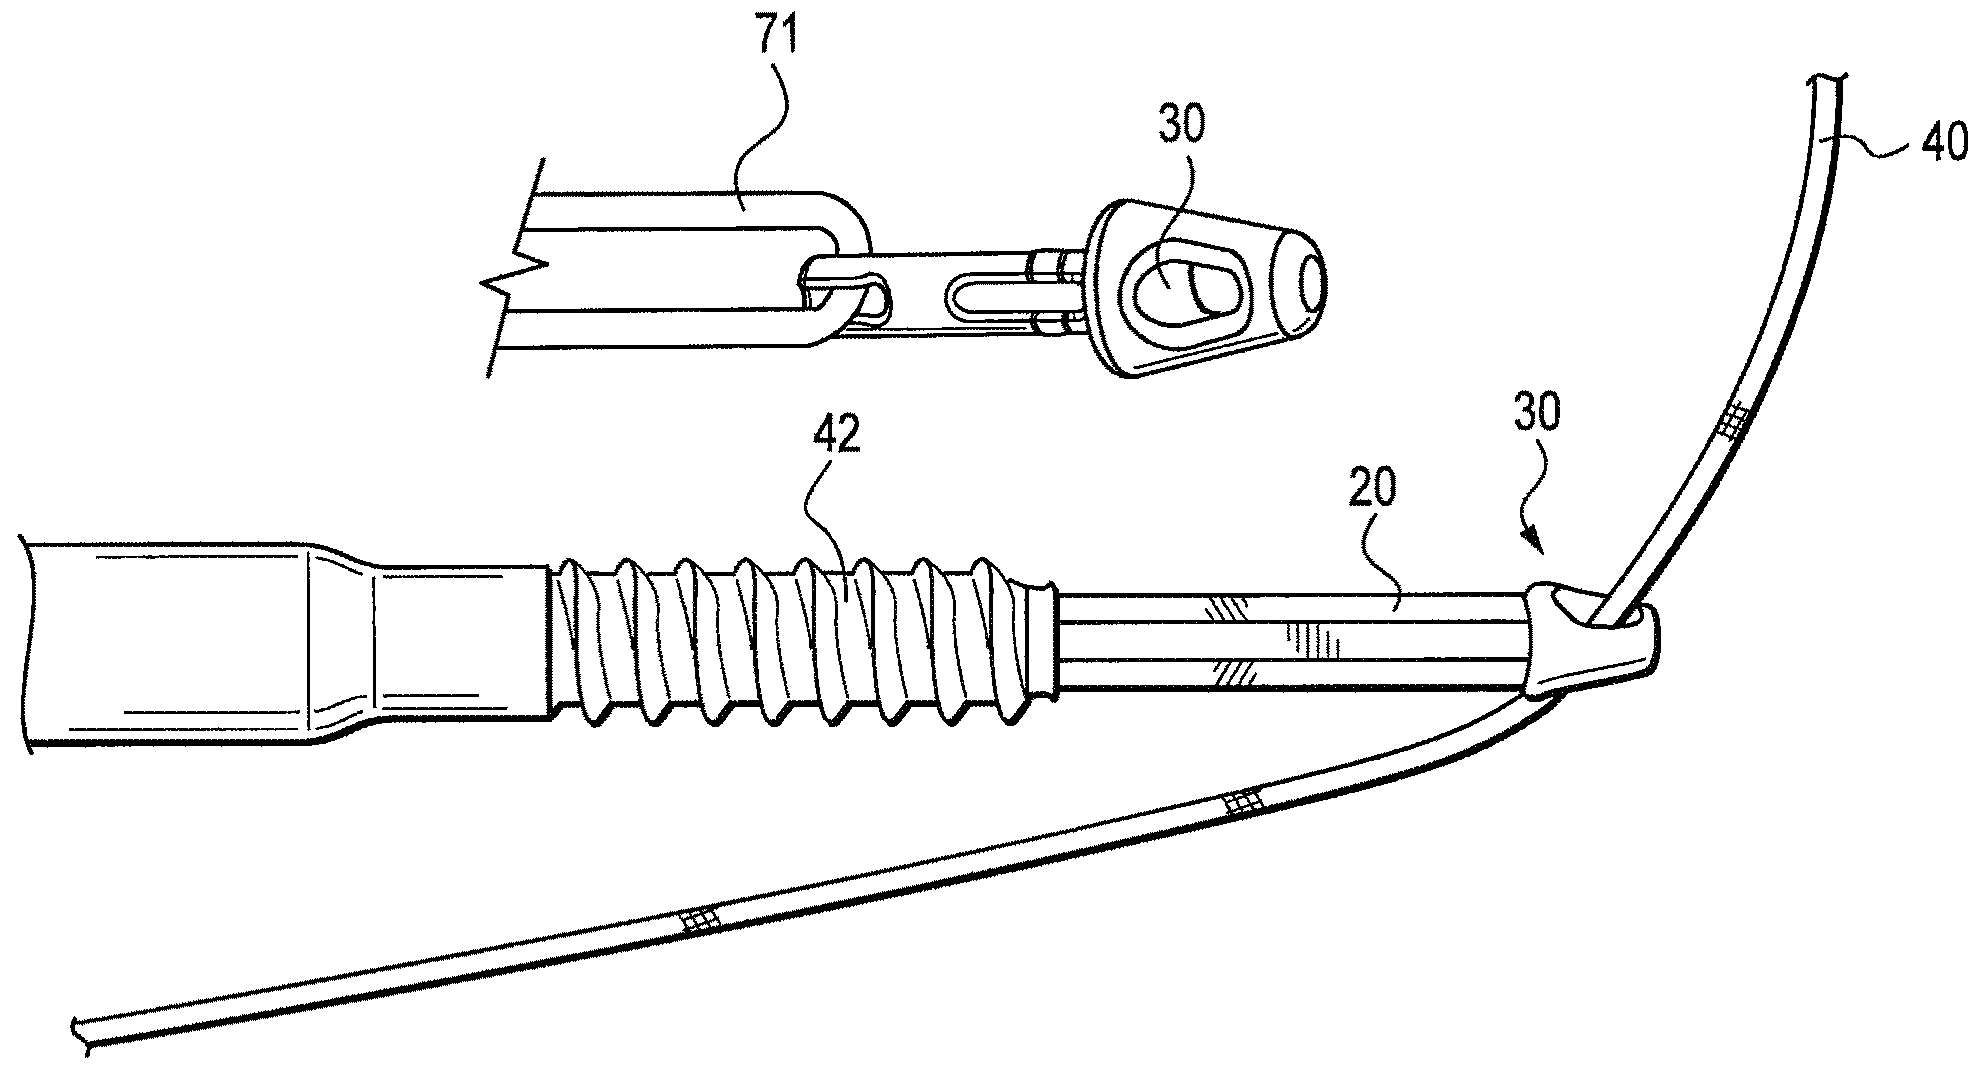 Swivel anchor for knotless fixation of tissue